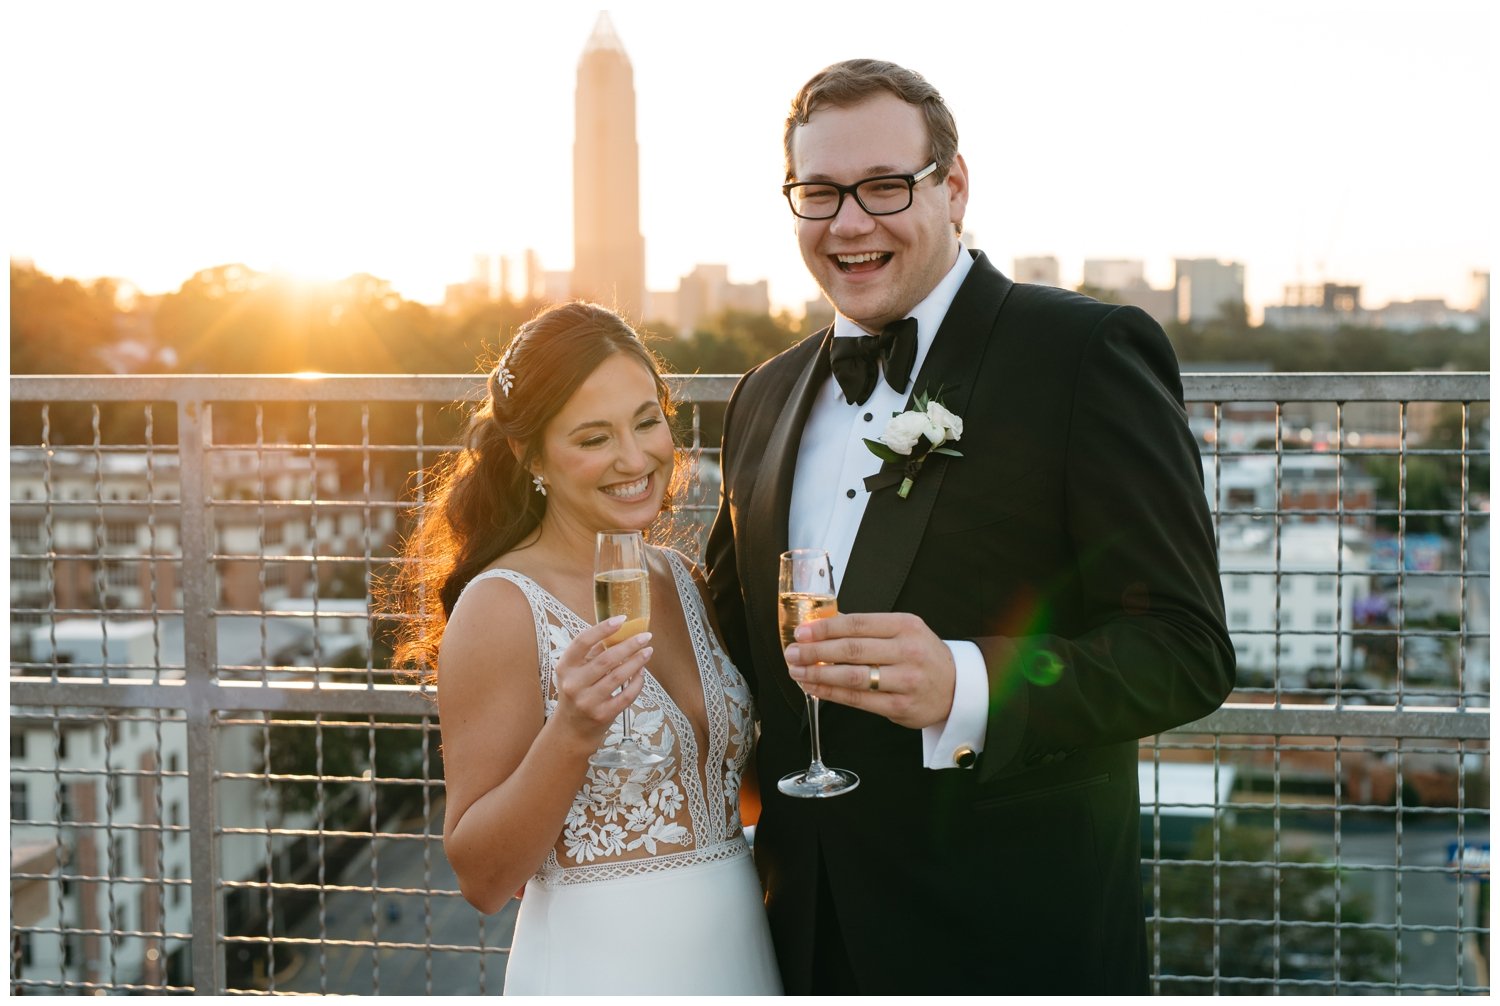 A couple drinks champagne during their small wedding reception at sunset